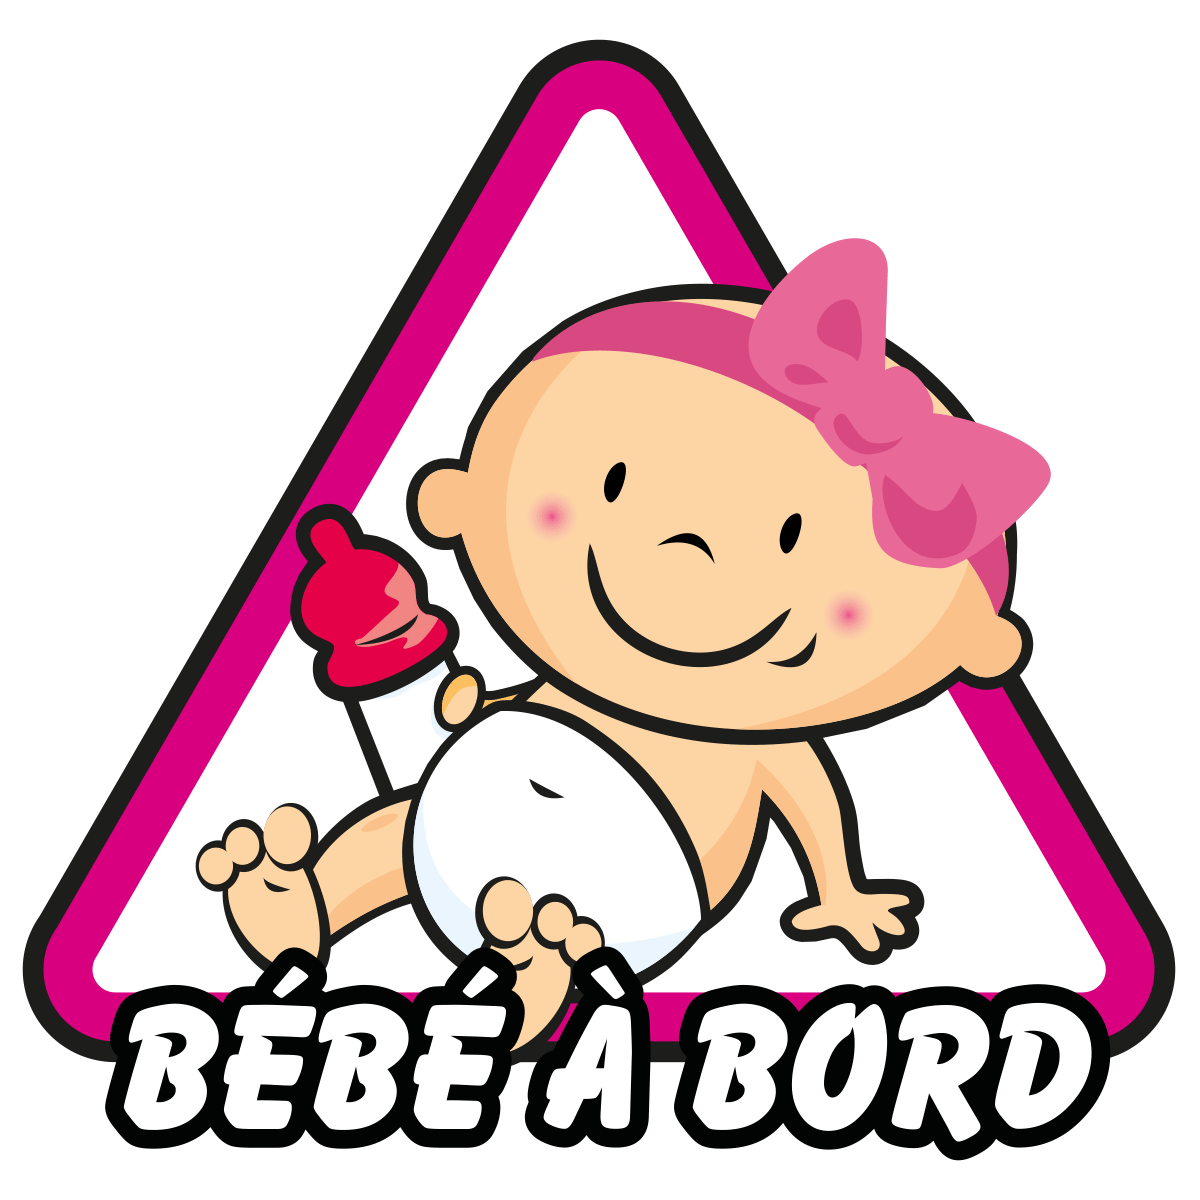 Stickers Bebe A Bord Stickers Voiture Bebe A Bord Ambiance Sticker